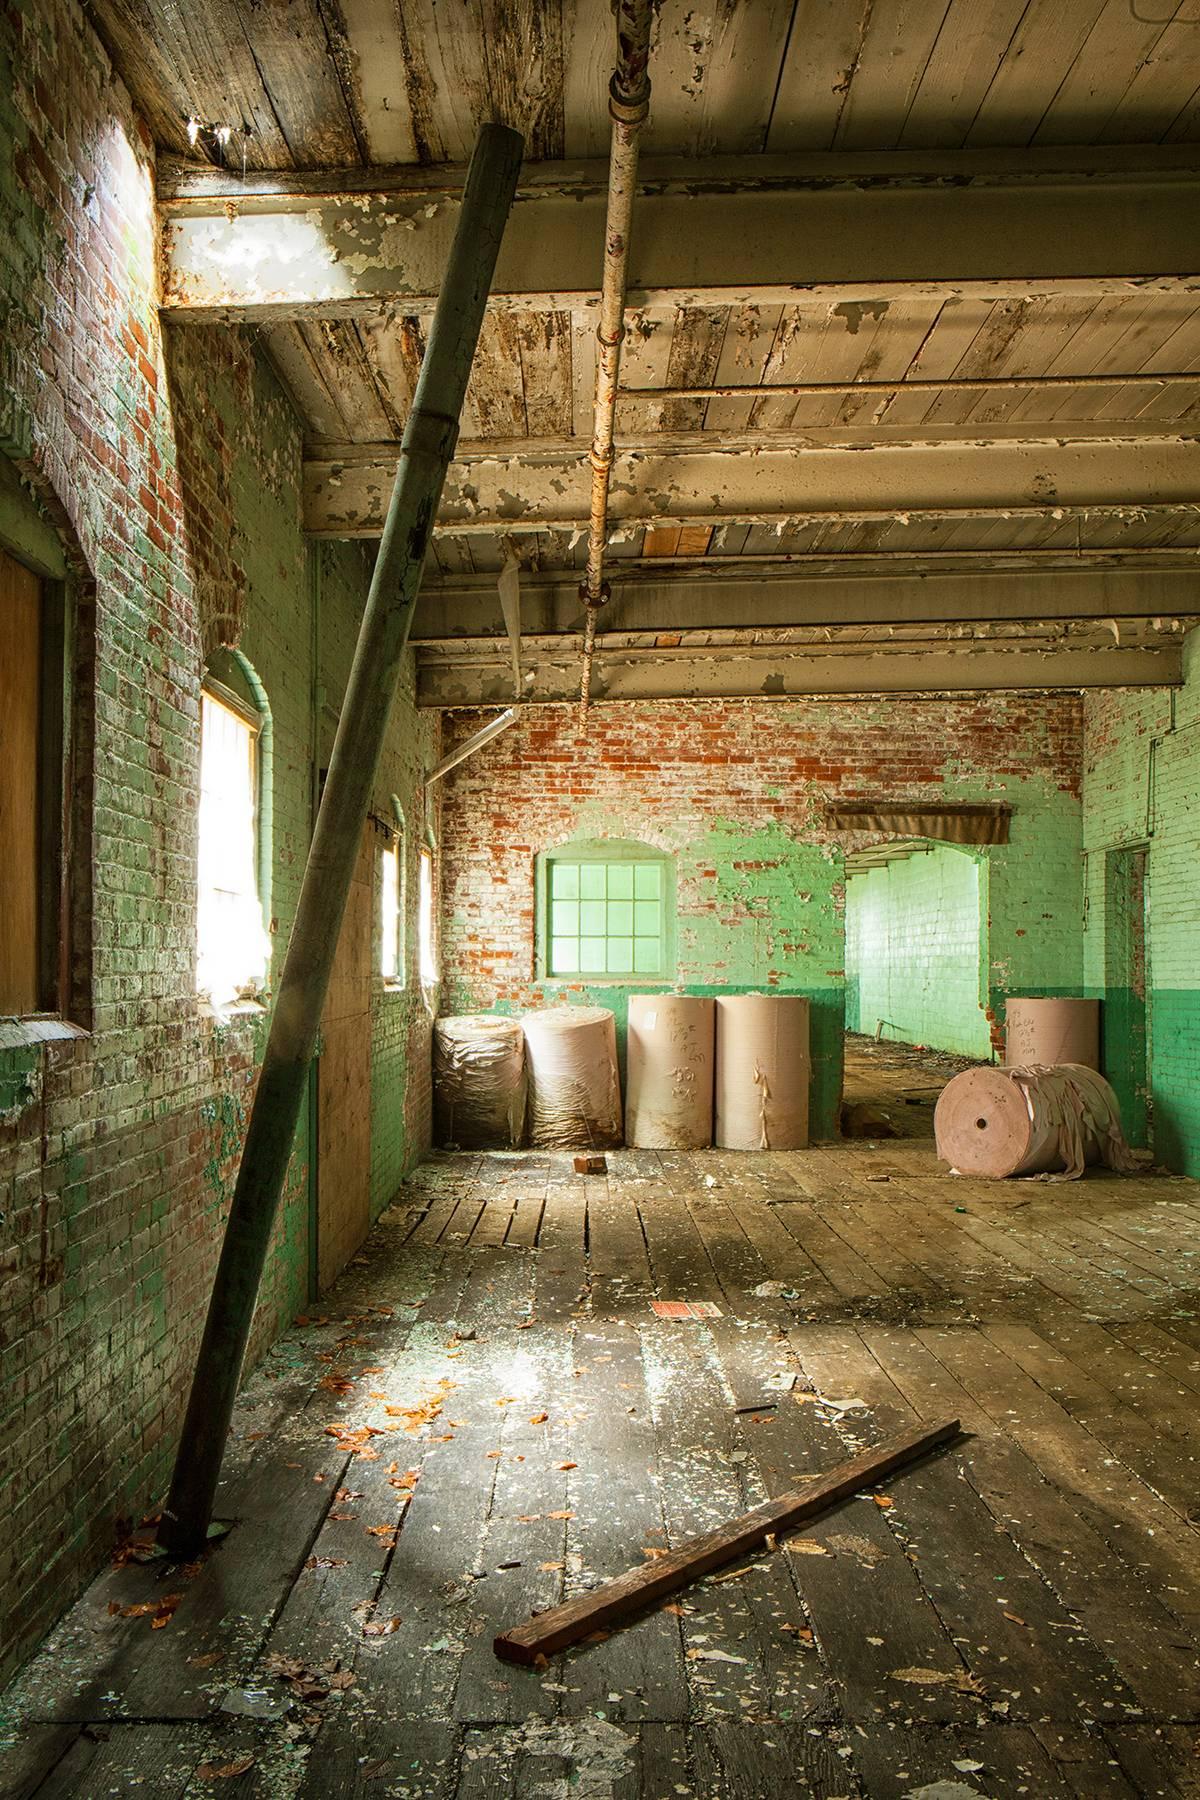 "Passing Time", abandoned paper mill, industrial, metal print, color photograph - Photograph by Rebecca Skinner